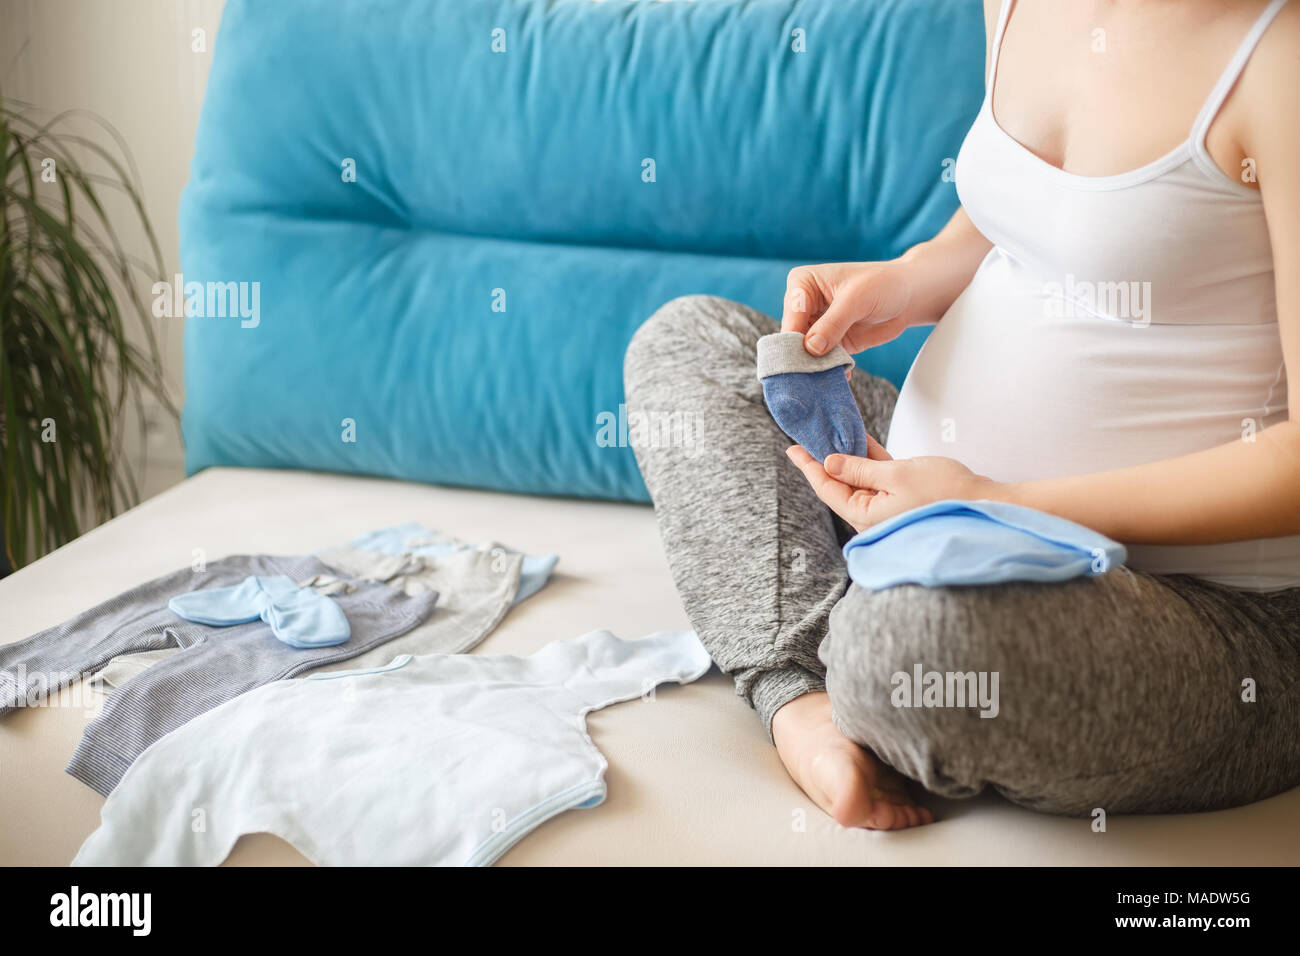 closeup of pregnant woman preparing baby clothes. Expectant mother with clothing for newborn. Pregnancy, people, expectation of baby concept Stock Photo